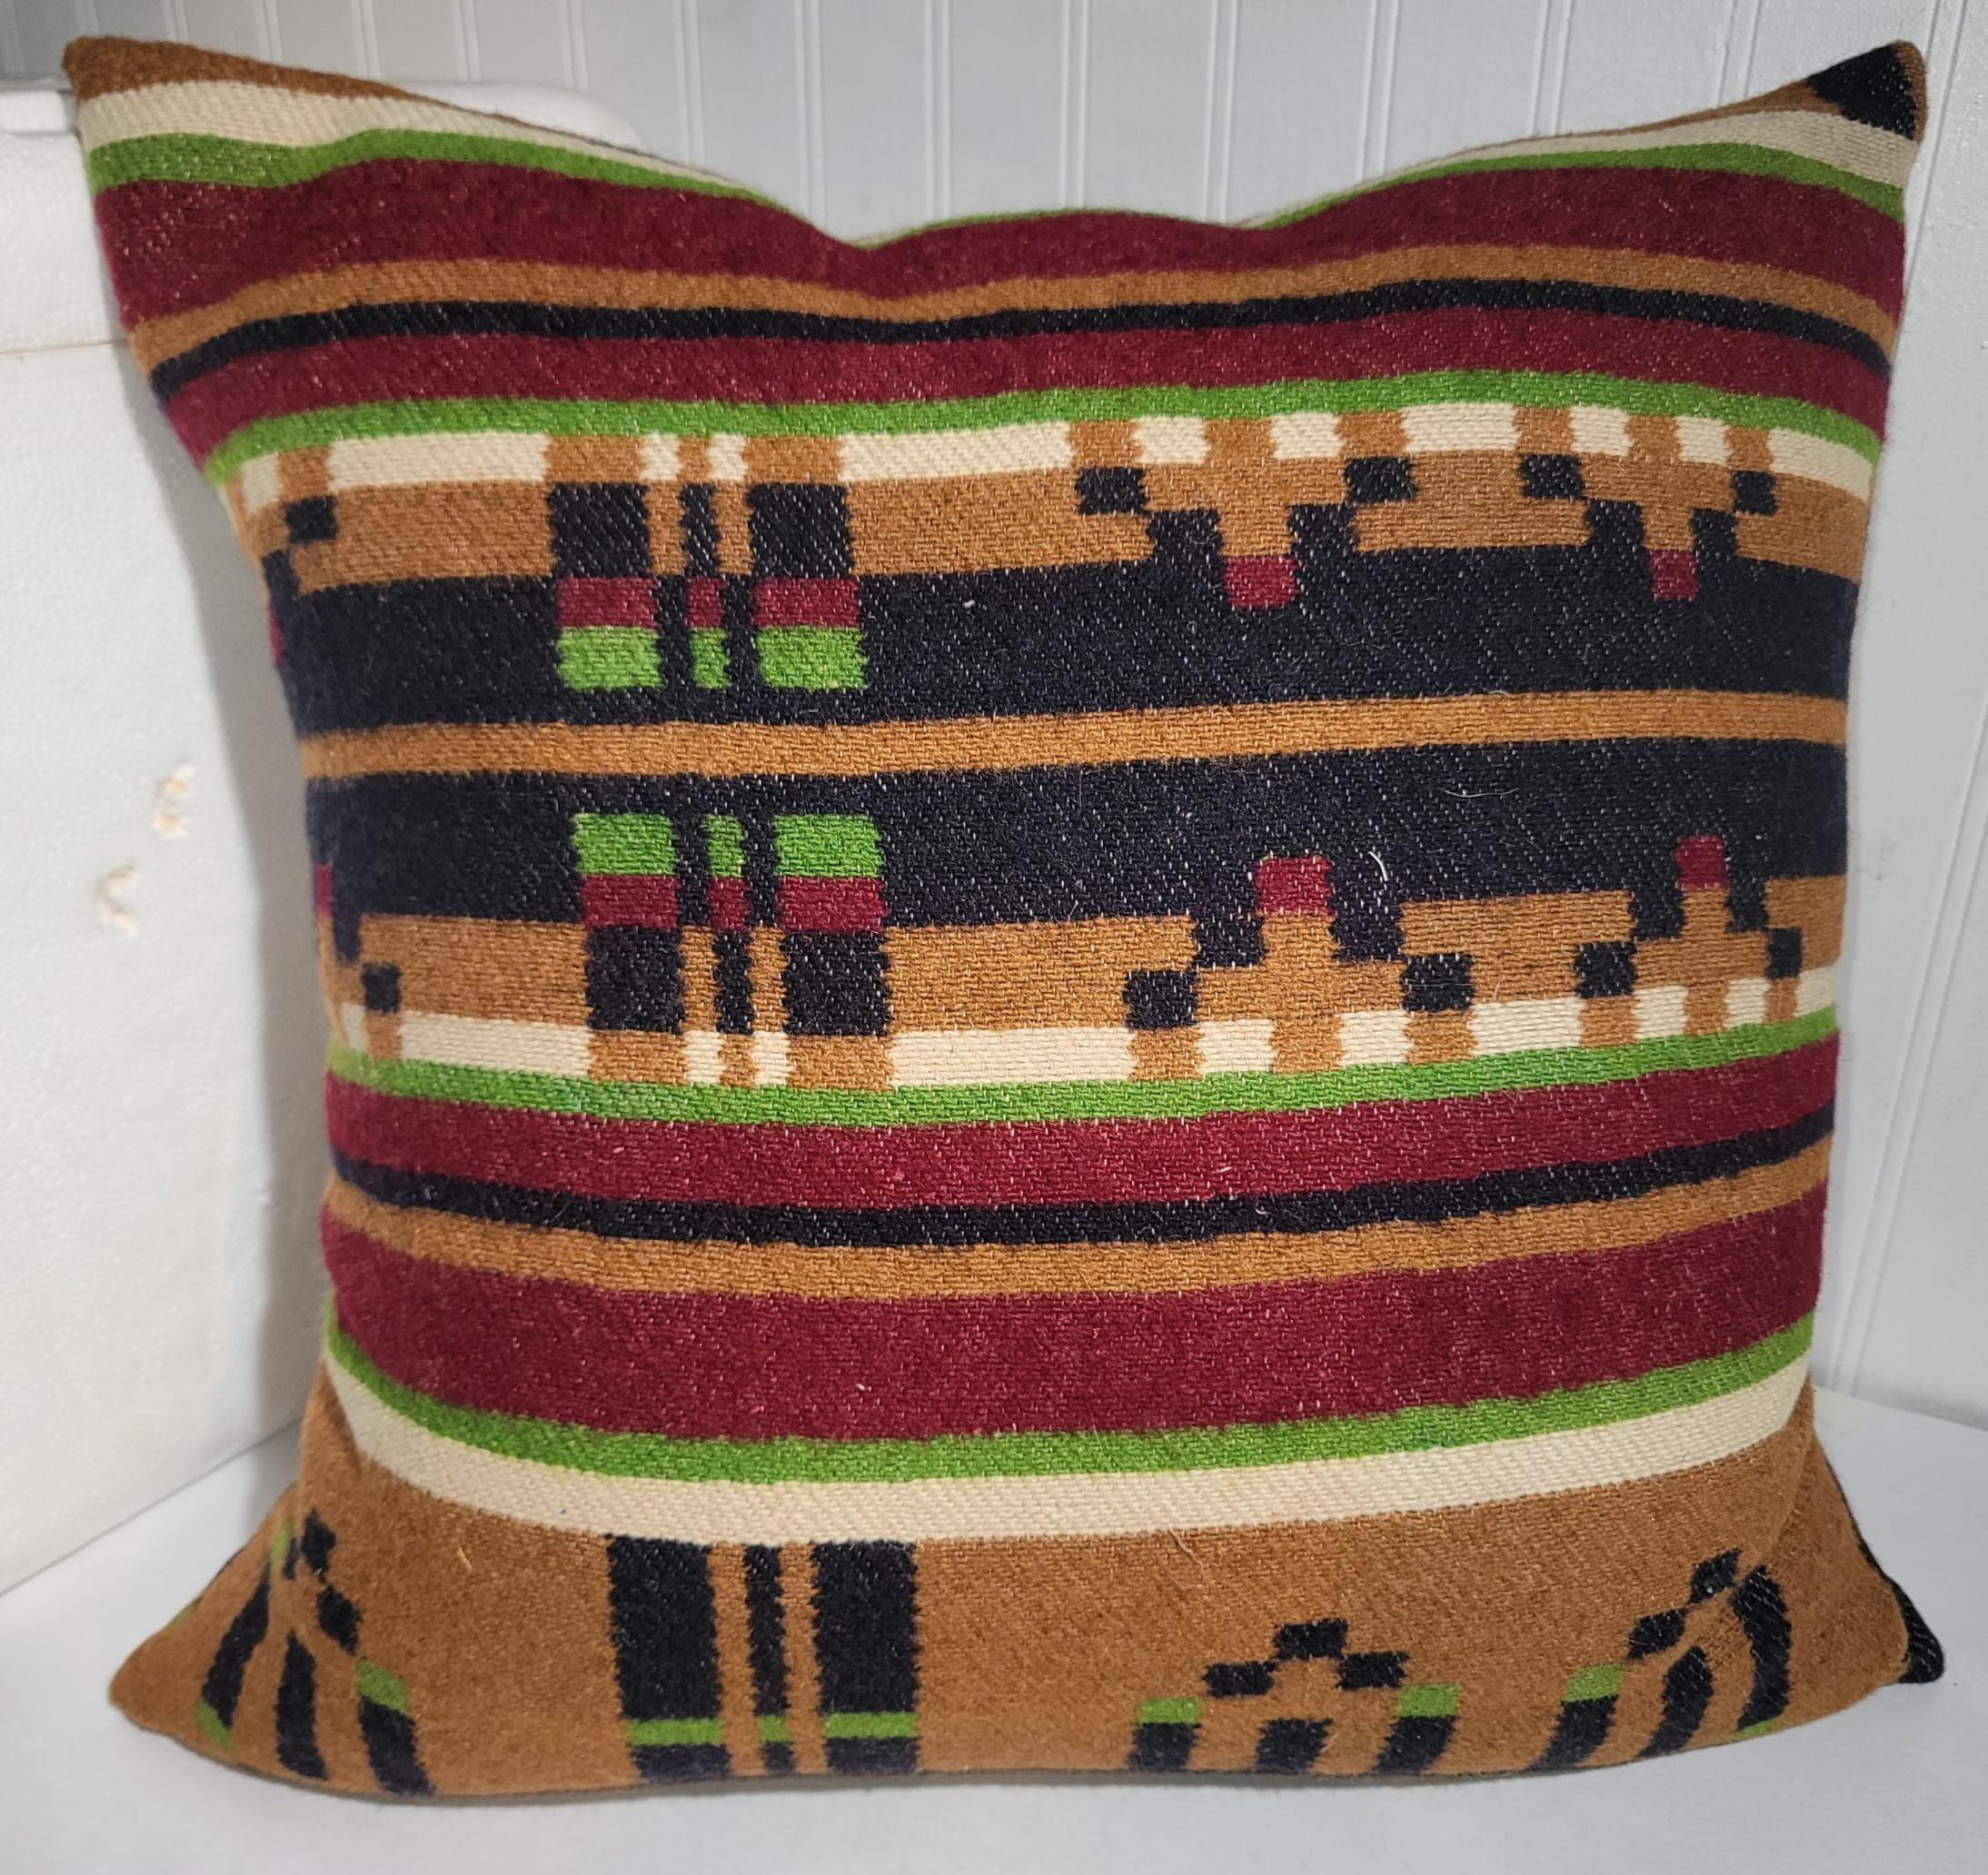 These amazing striped 19thc horse blanket pillows are in wool with cotton linen backings.Sold as a group of three.The inserts are down & feather fill.